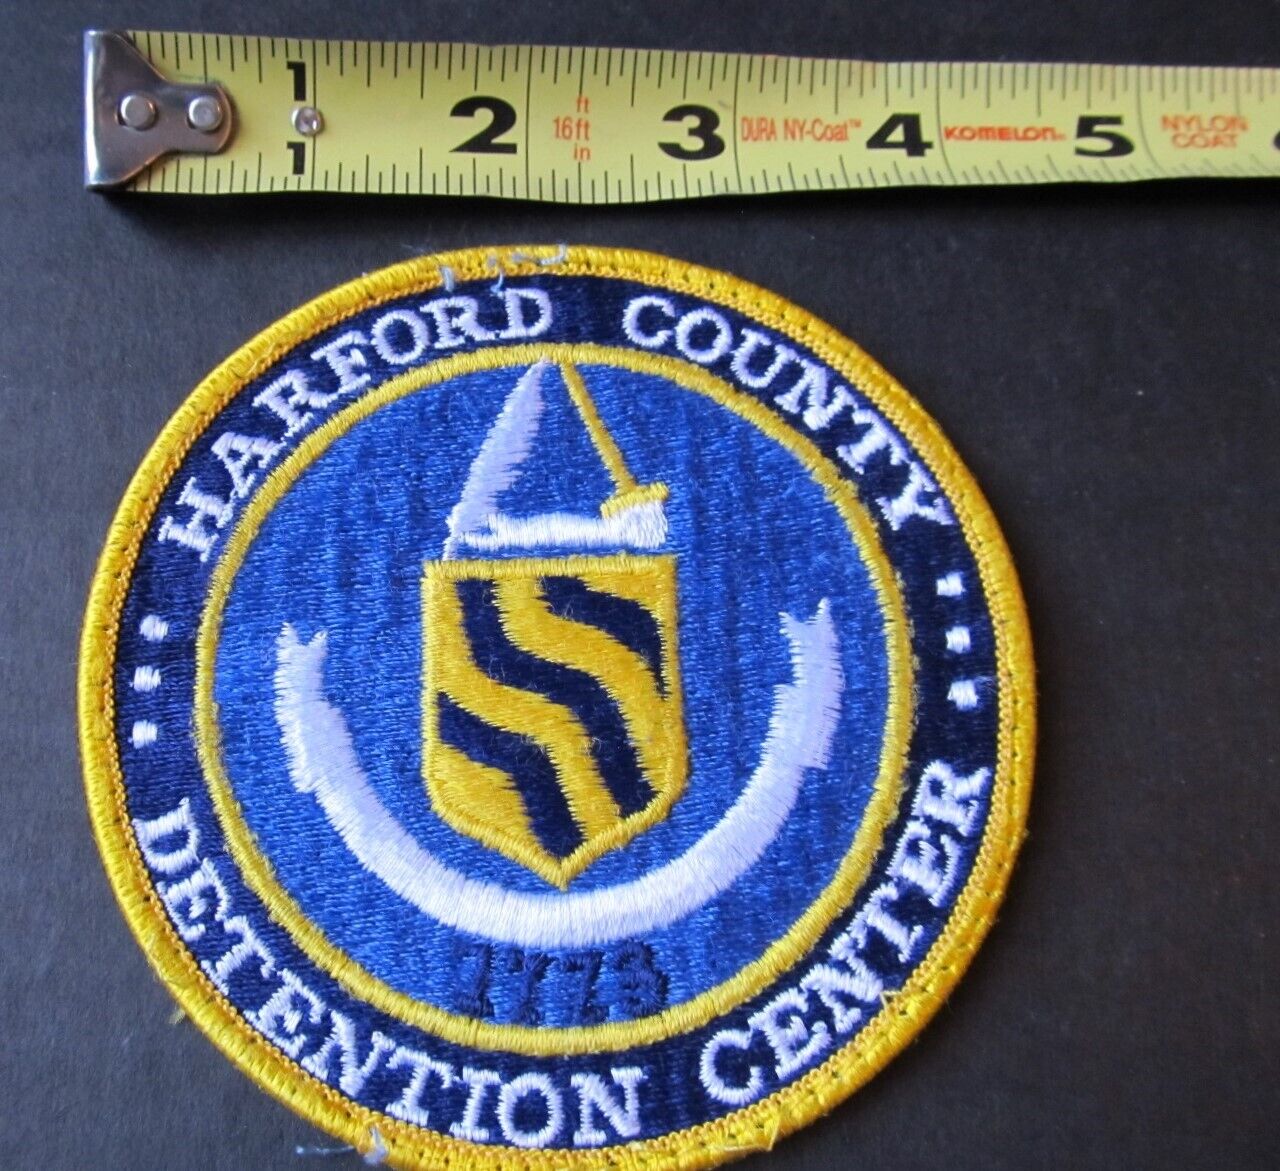 Vintage Harford county detention Patch obsolete Deadstock